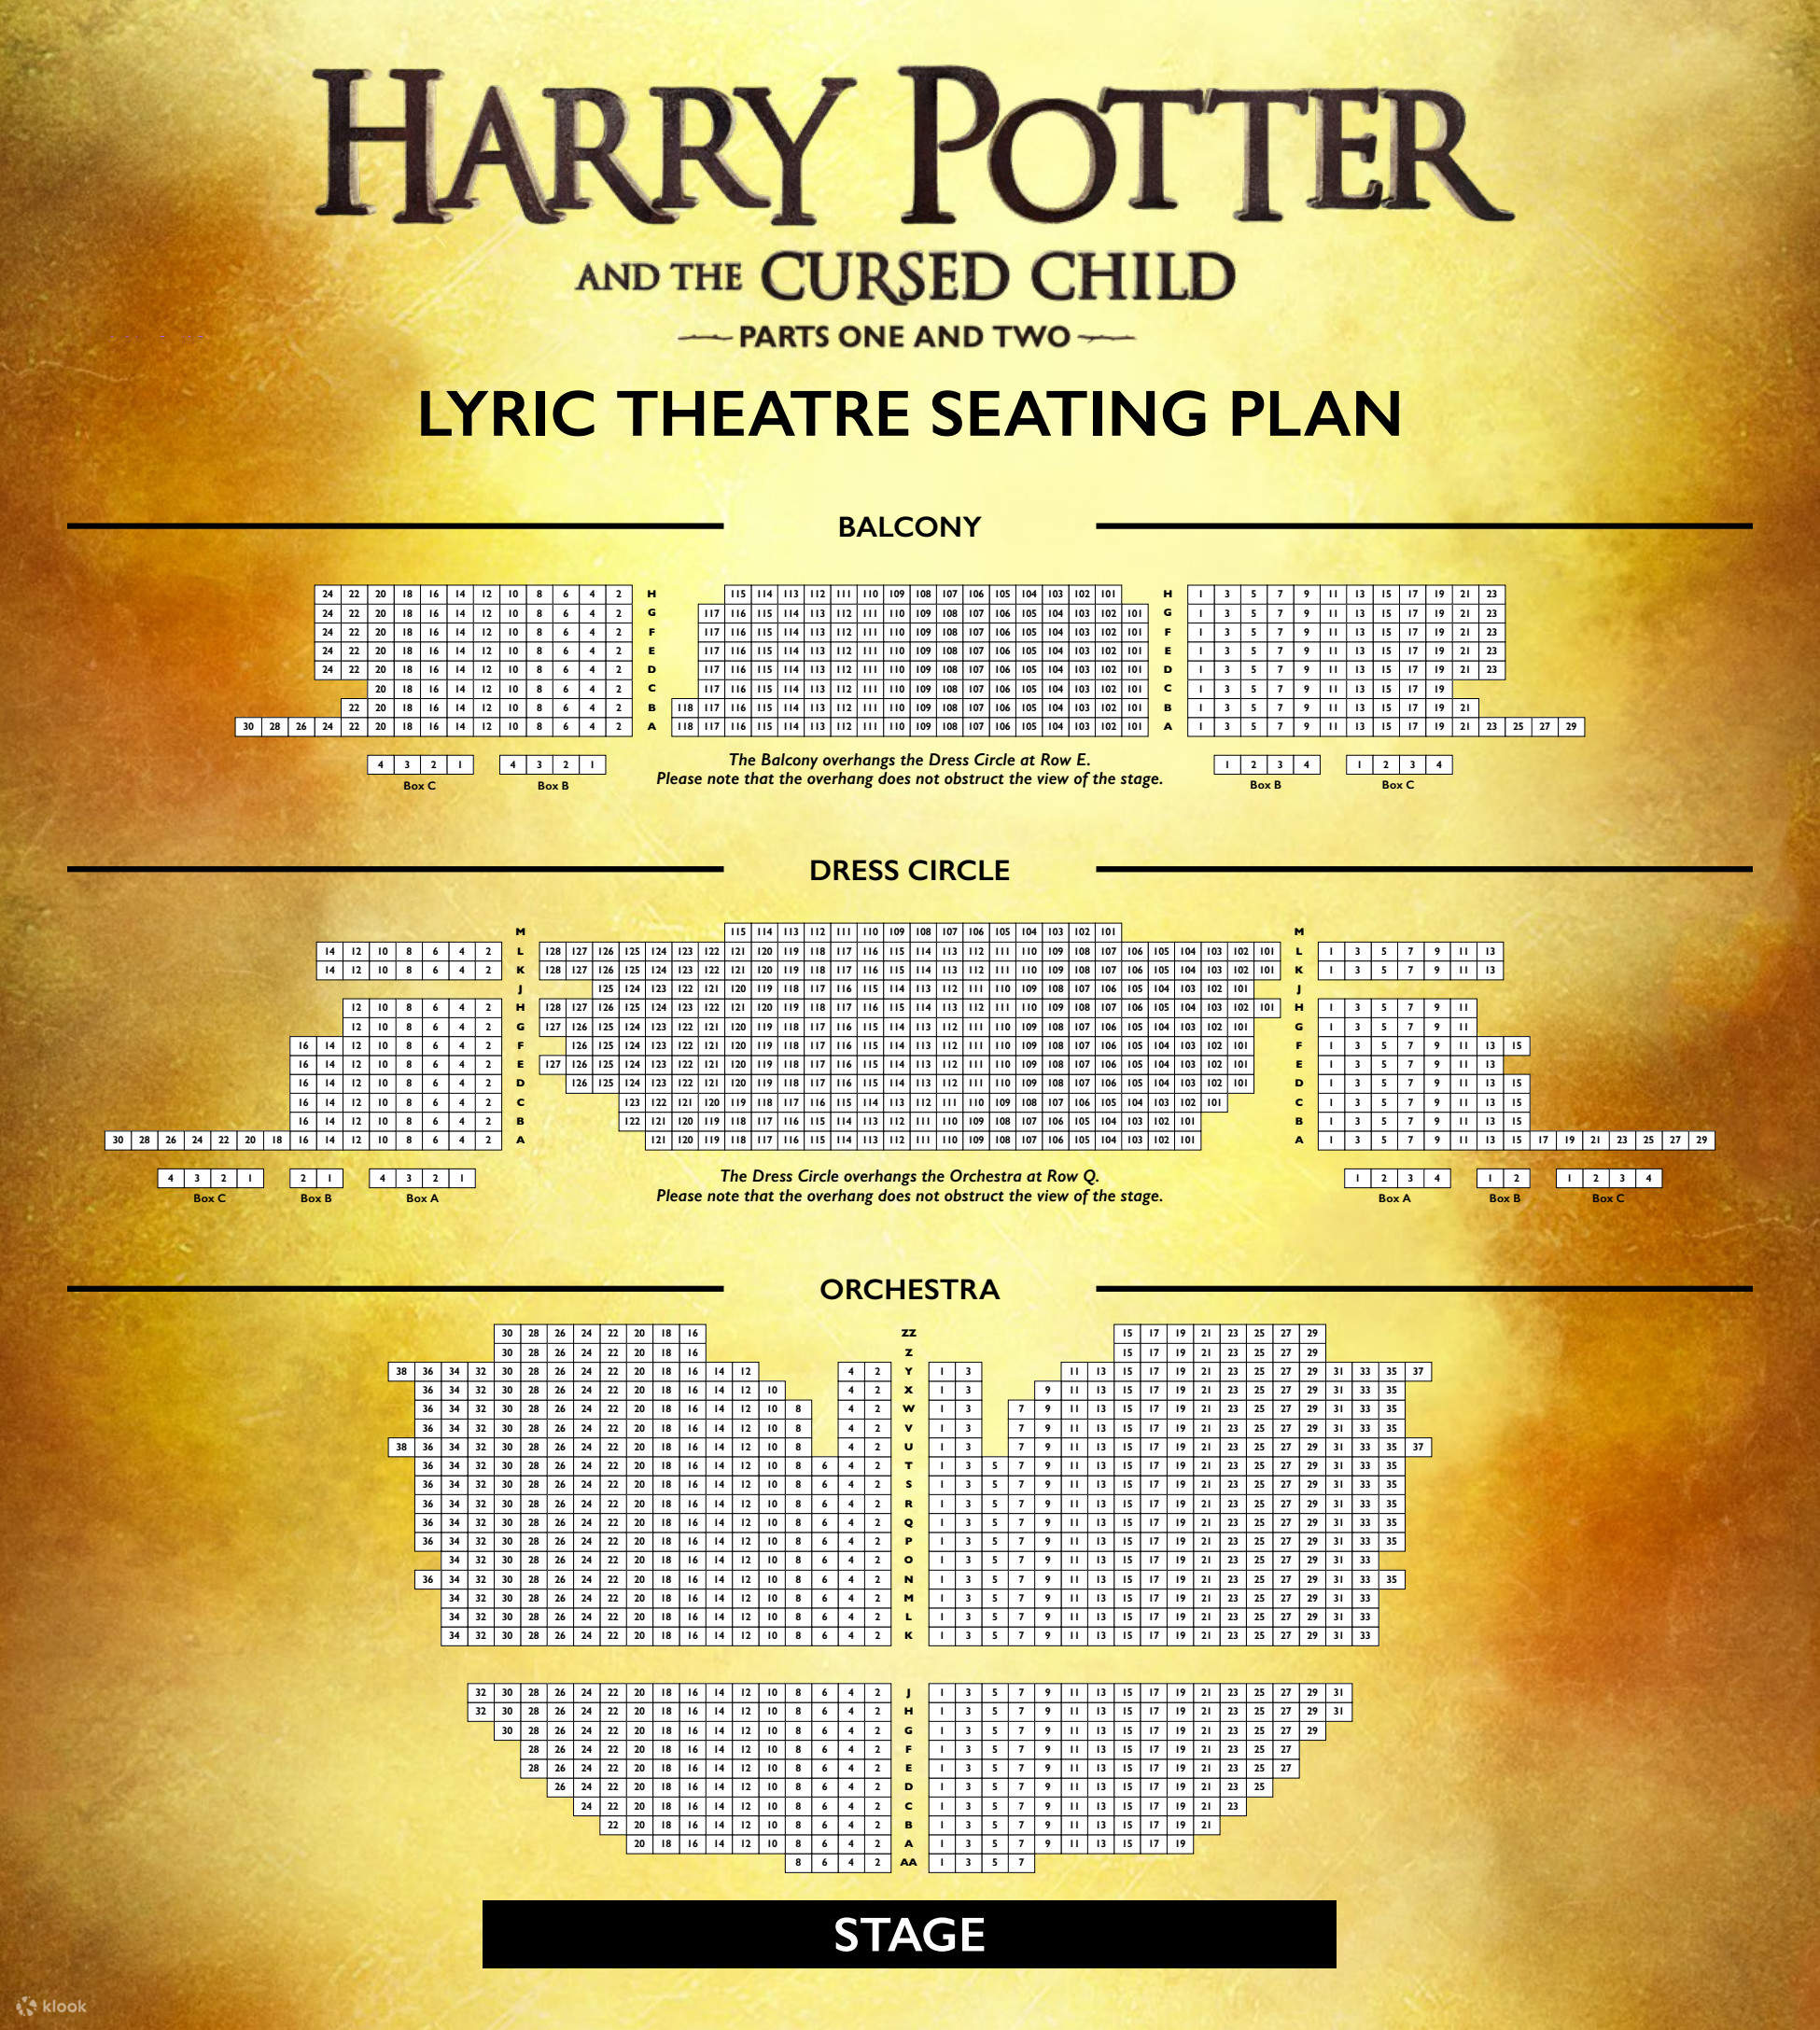 Theater seating. Theatre Seating Plan. Theater Seats Plan. Seats in the Theatre. Theater poster.